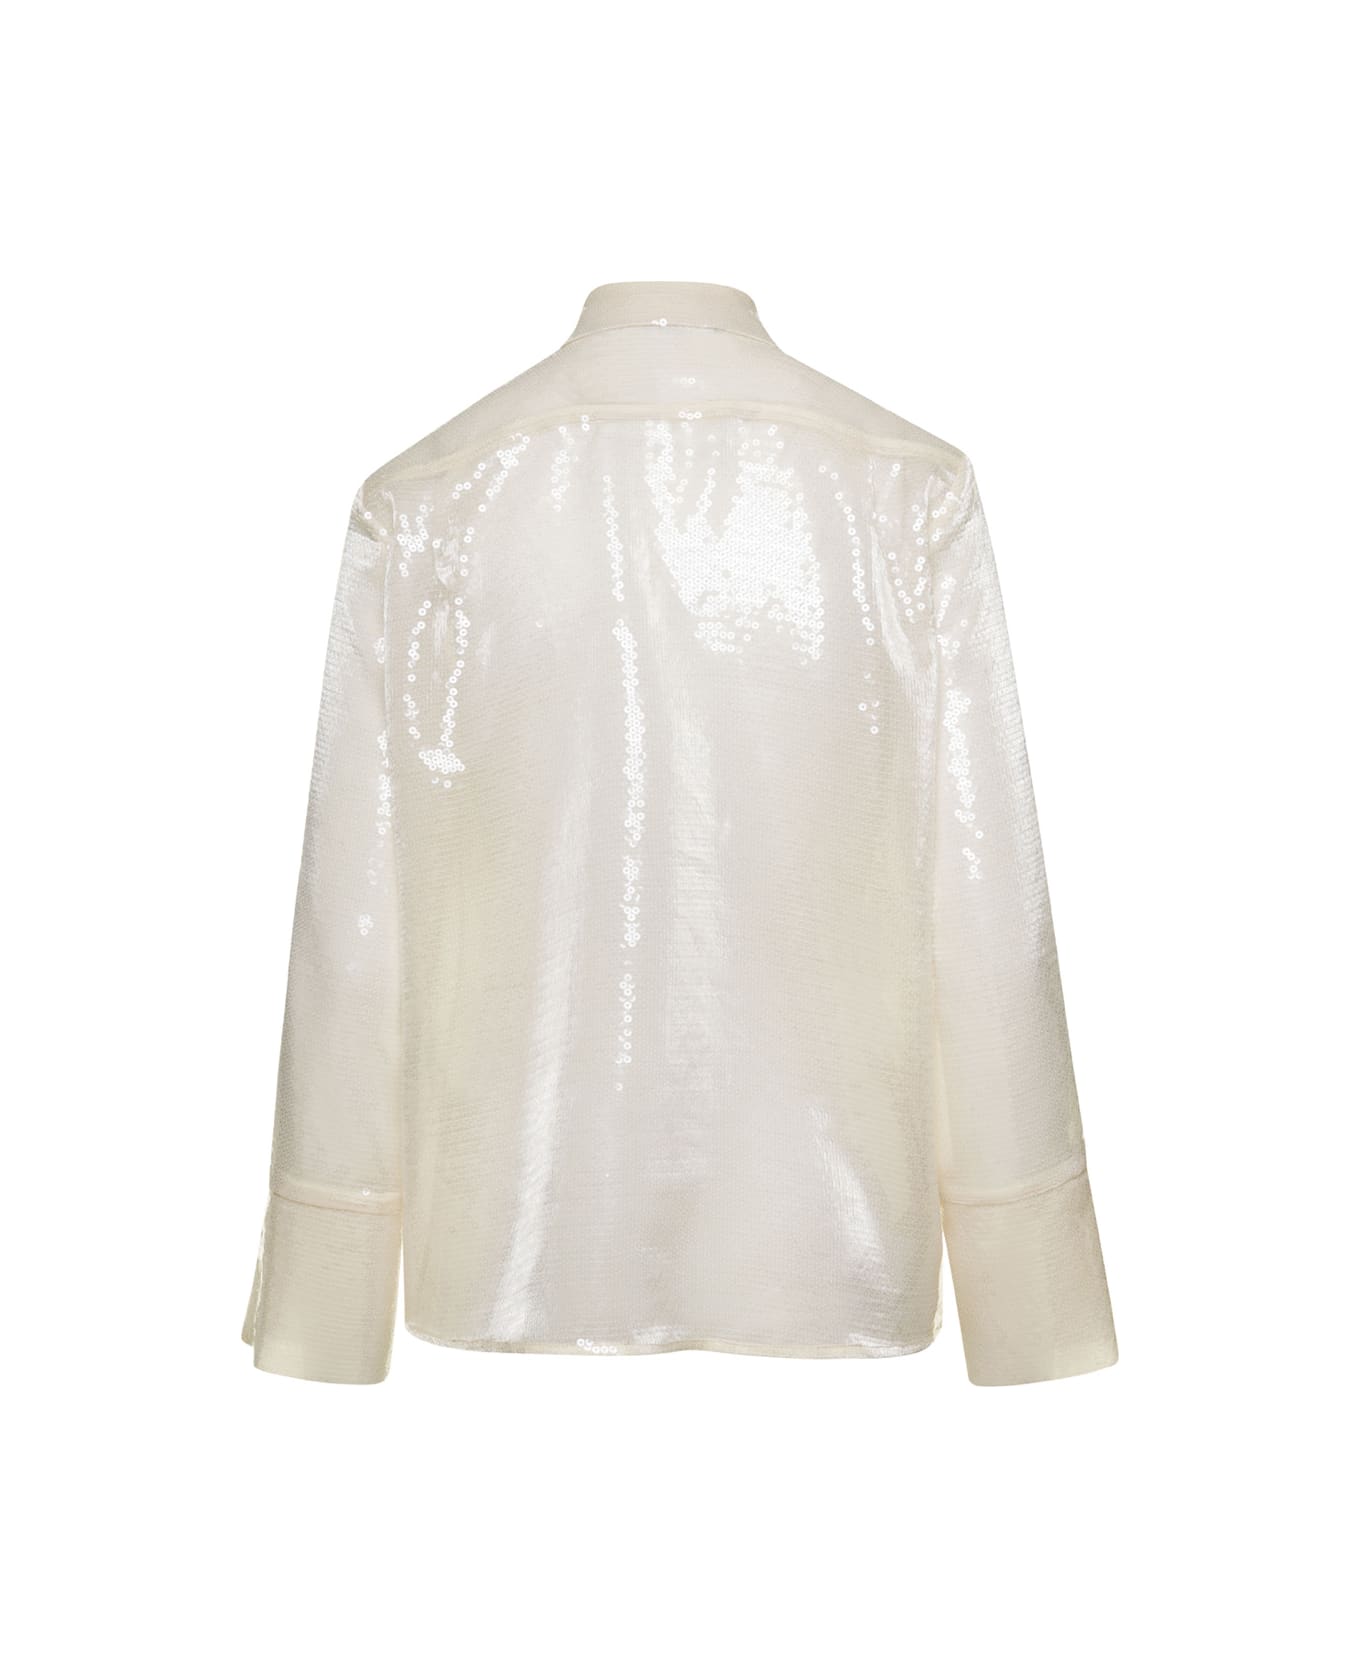 Federica Tosi Cream Shirt With Sequins All Over In Techno Fabric Woman - White